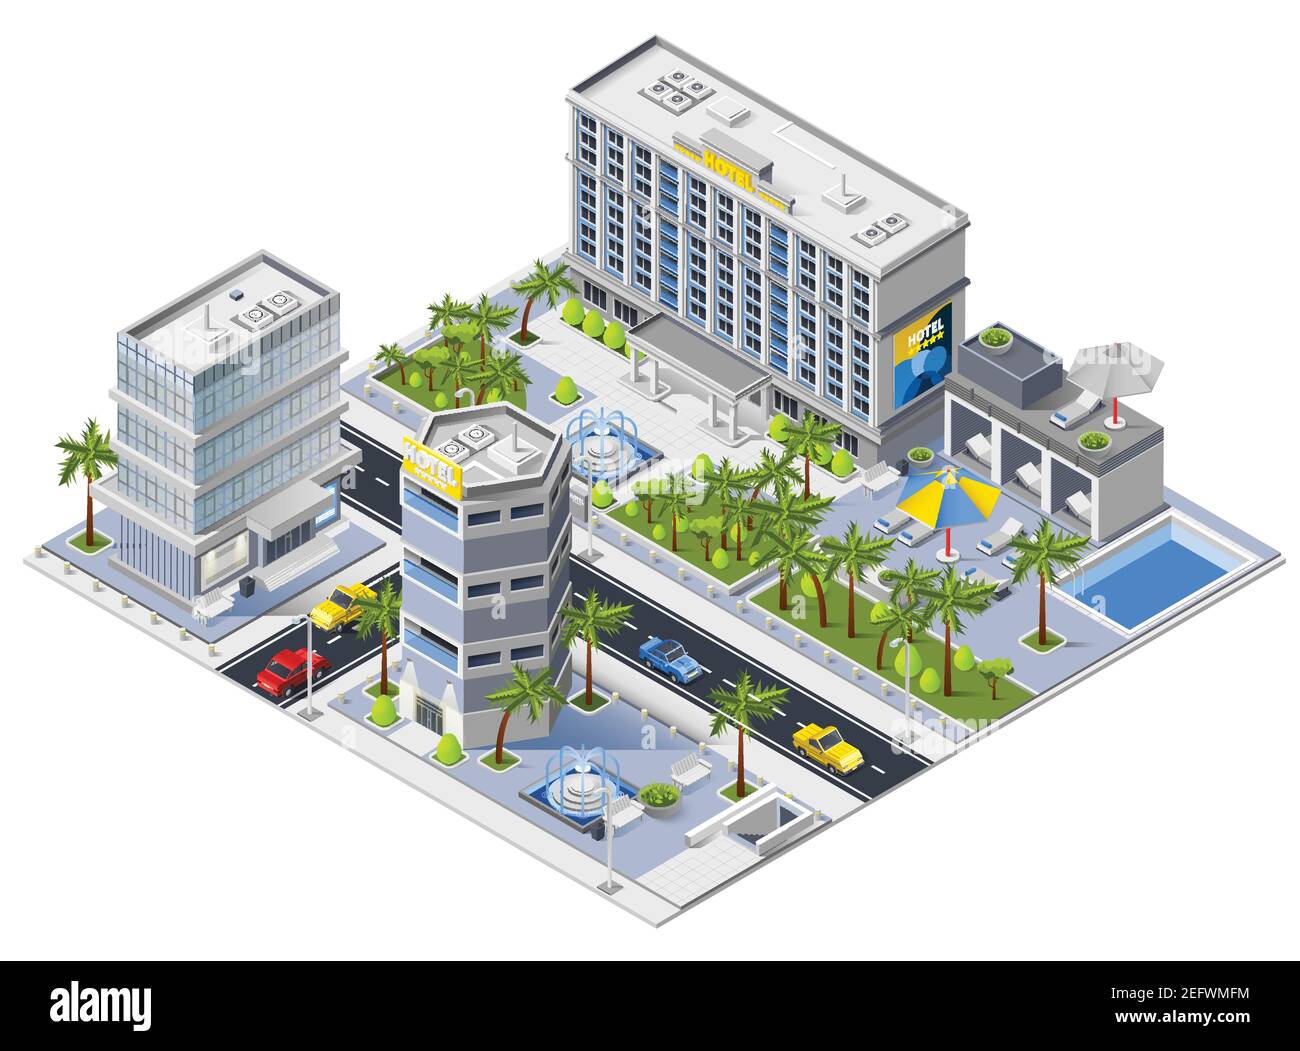 Luxury hotel buildings isometric design concept with south urban landscape and city transport vector illustration Stock Vector